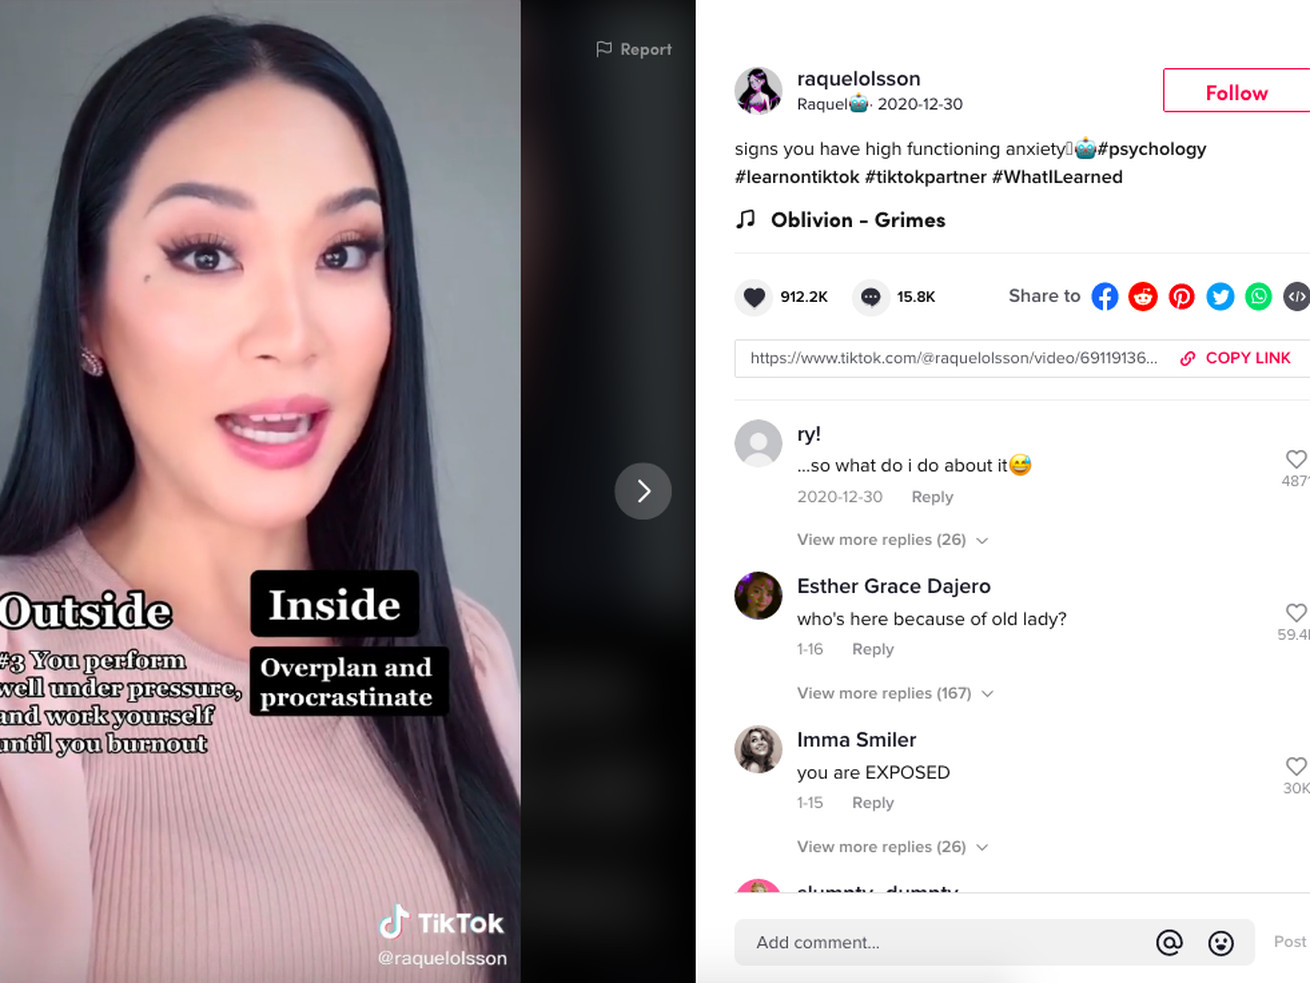 This week in TikTok: How does TikTok know I have ADHD?